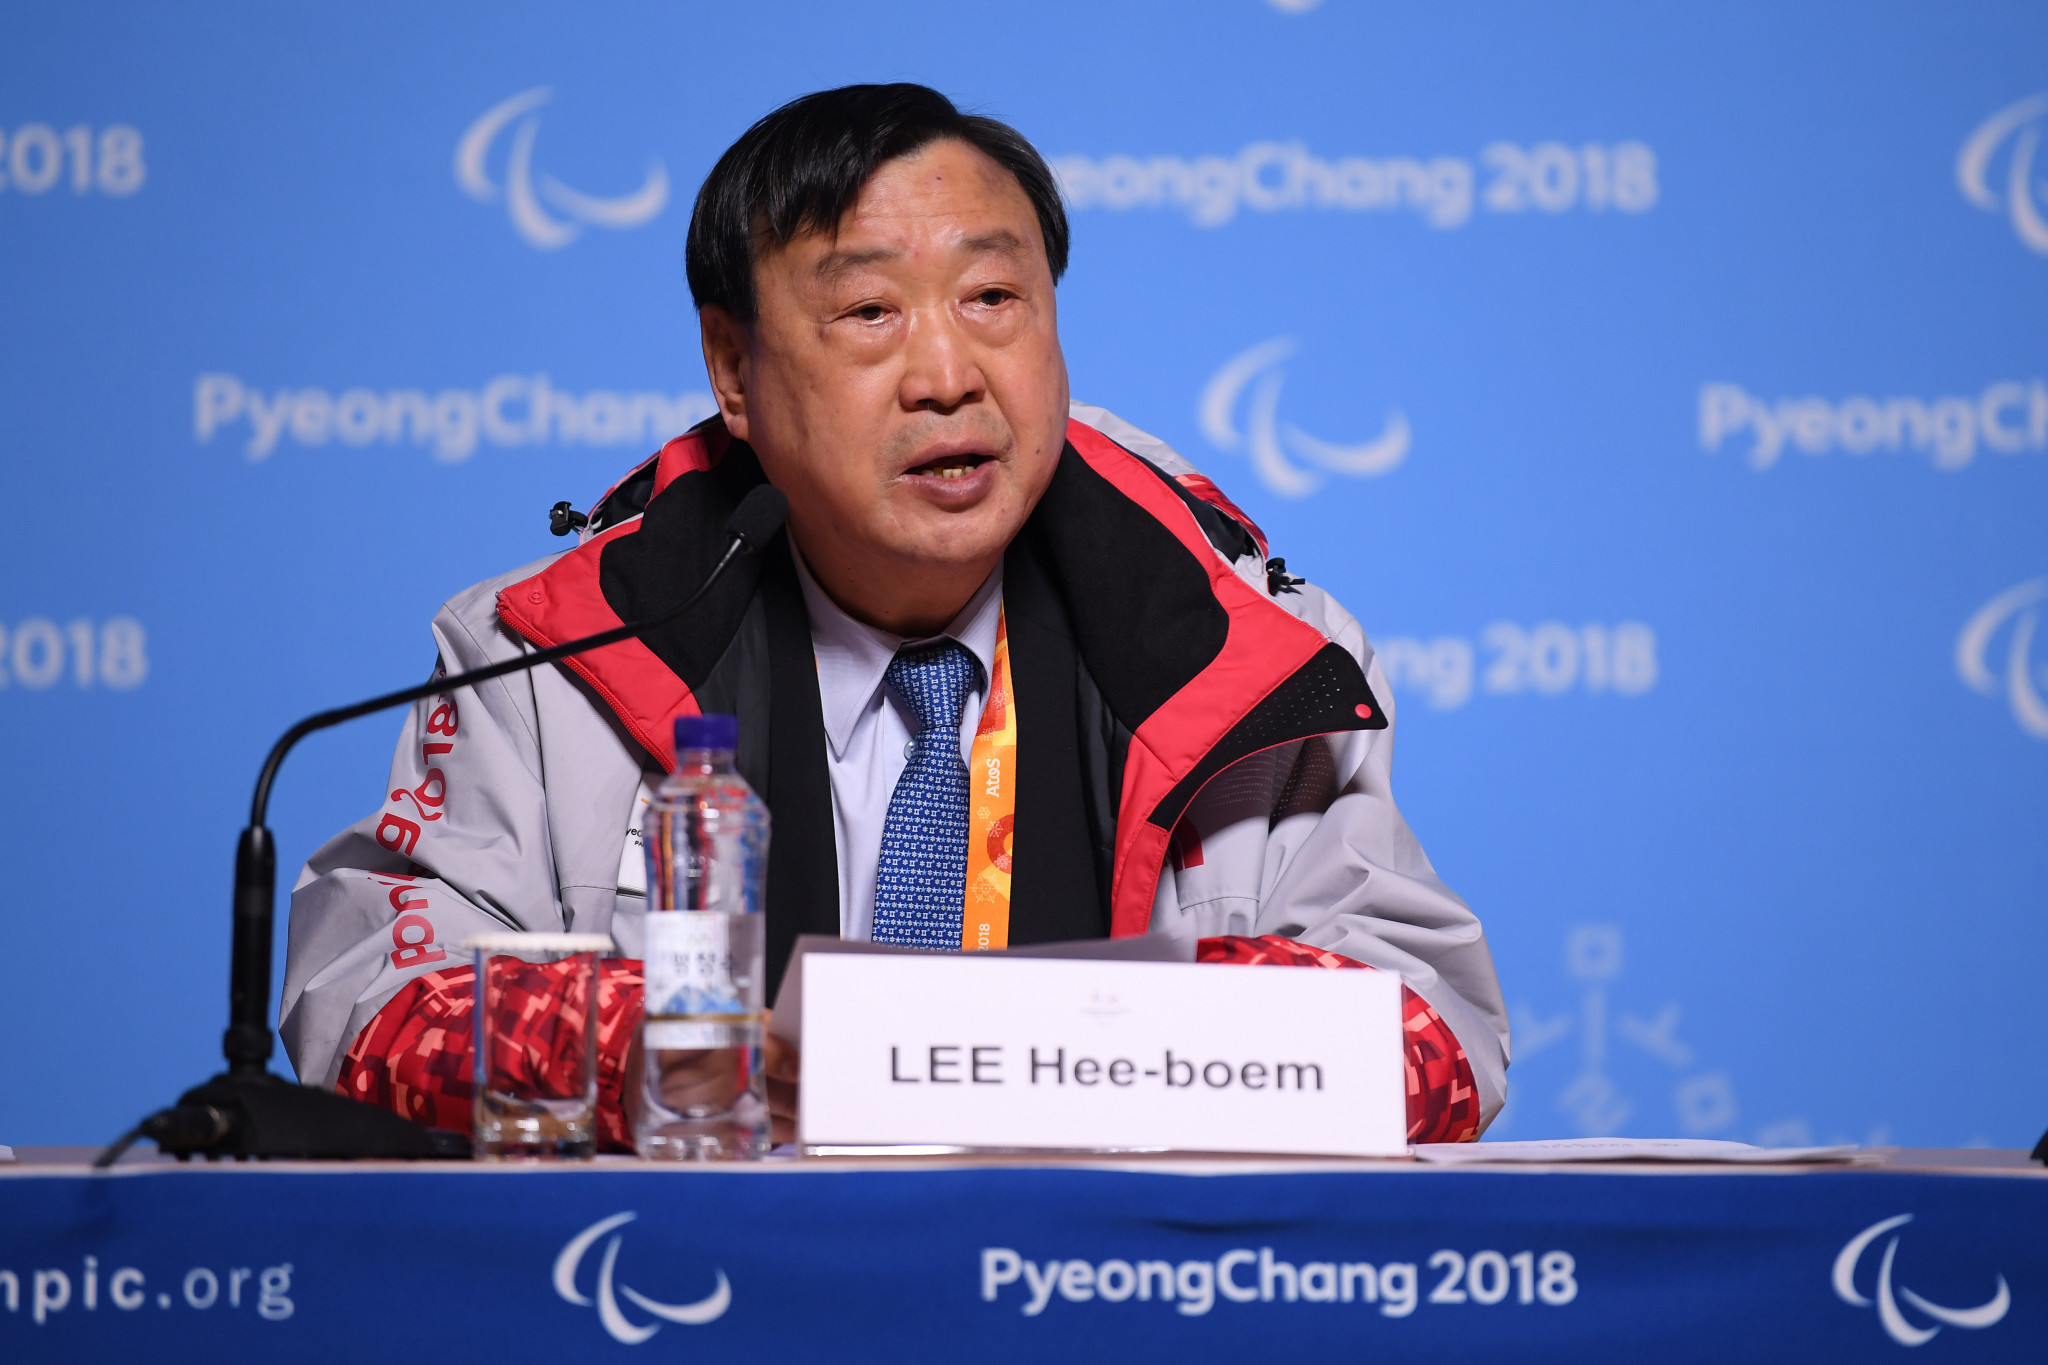 Pyeongchang 2018 President Lee Hee-boem has hailed the participation of North Korean athletes at the upcoming Paralympic Games ©Getty Images